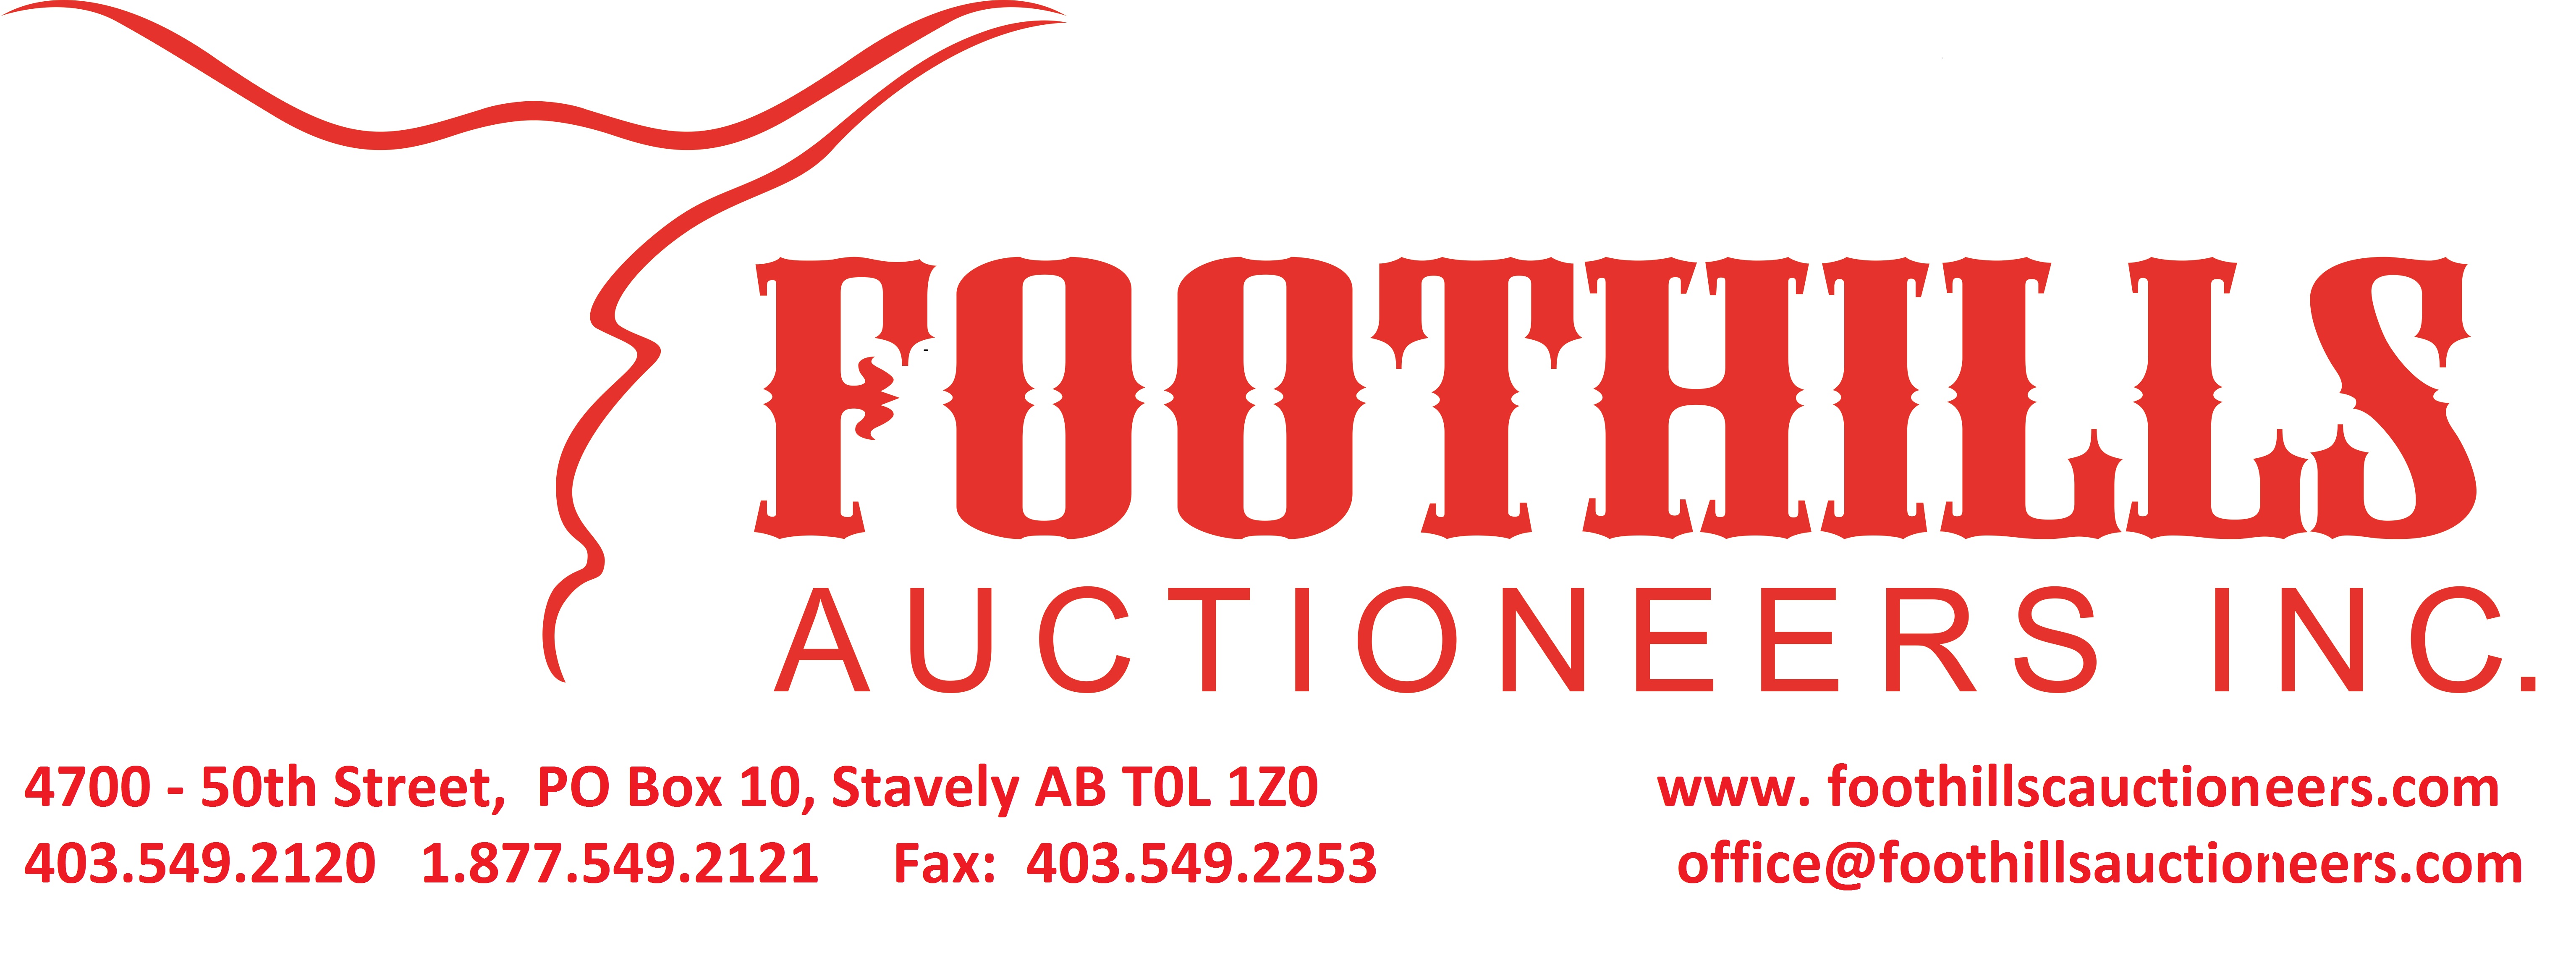 Foothills Auctioneers Inc.